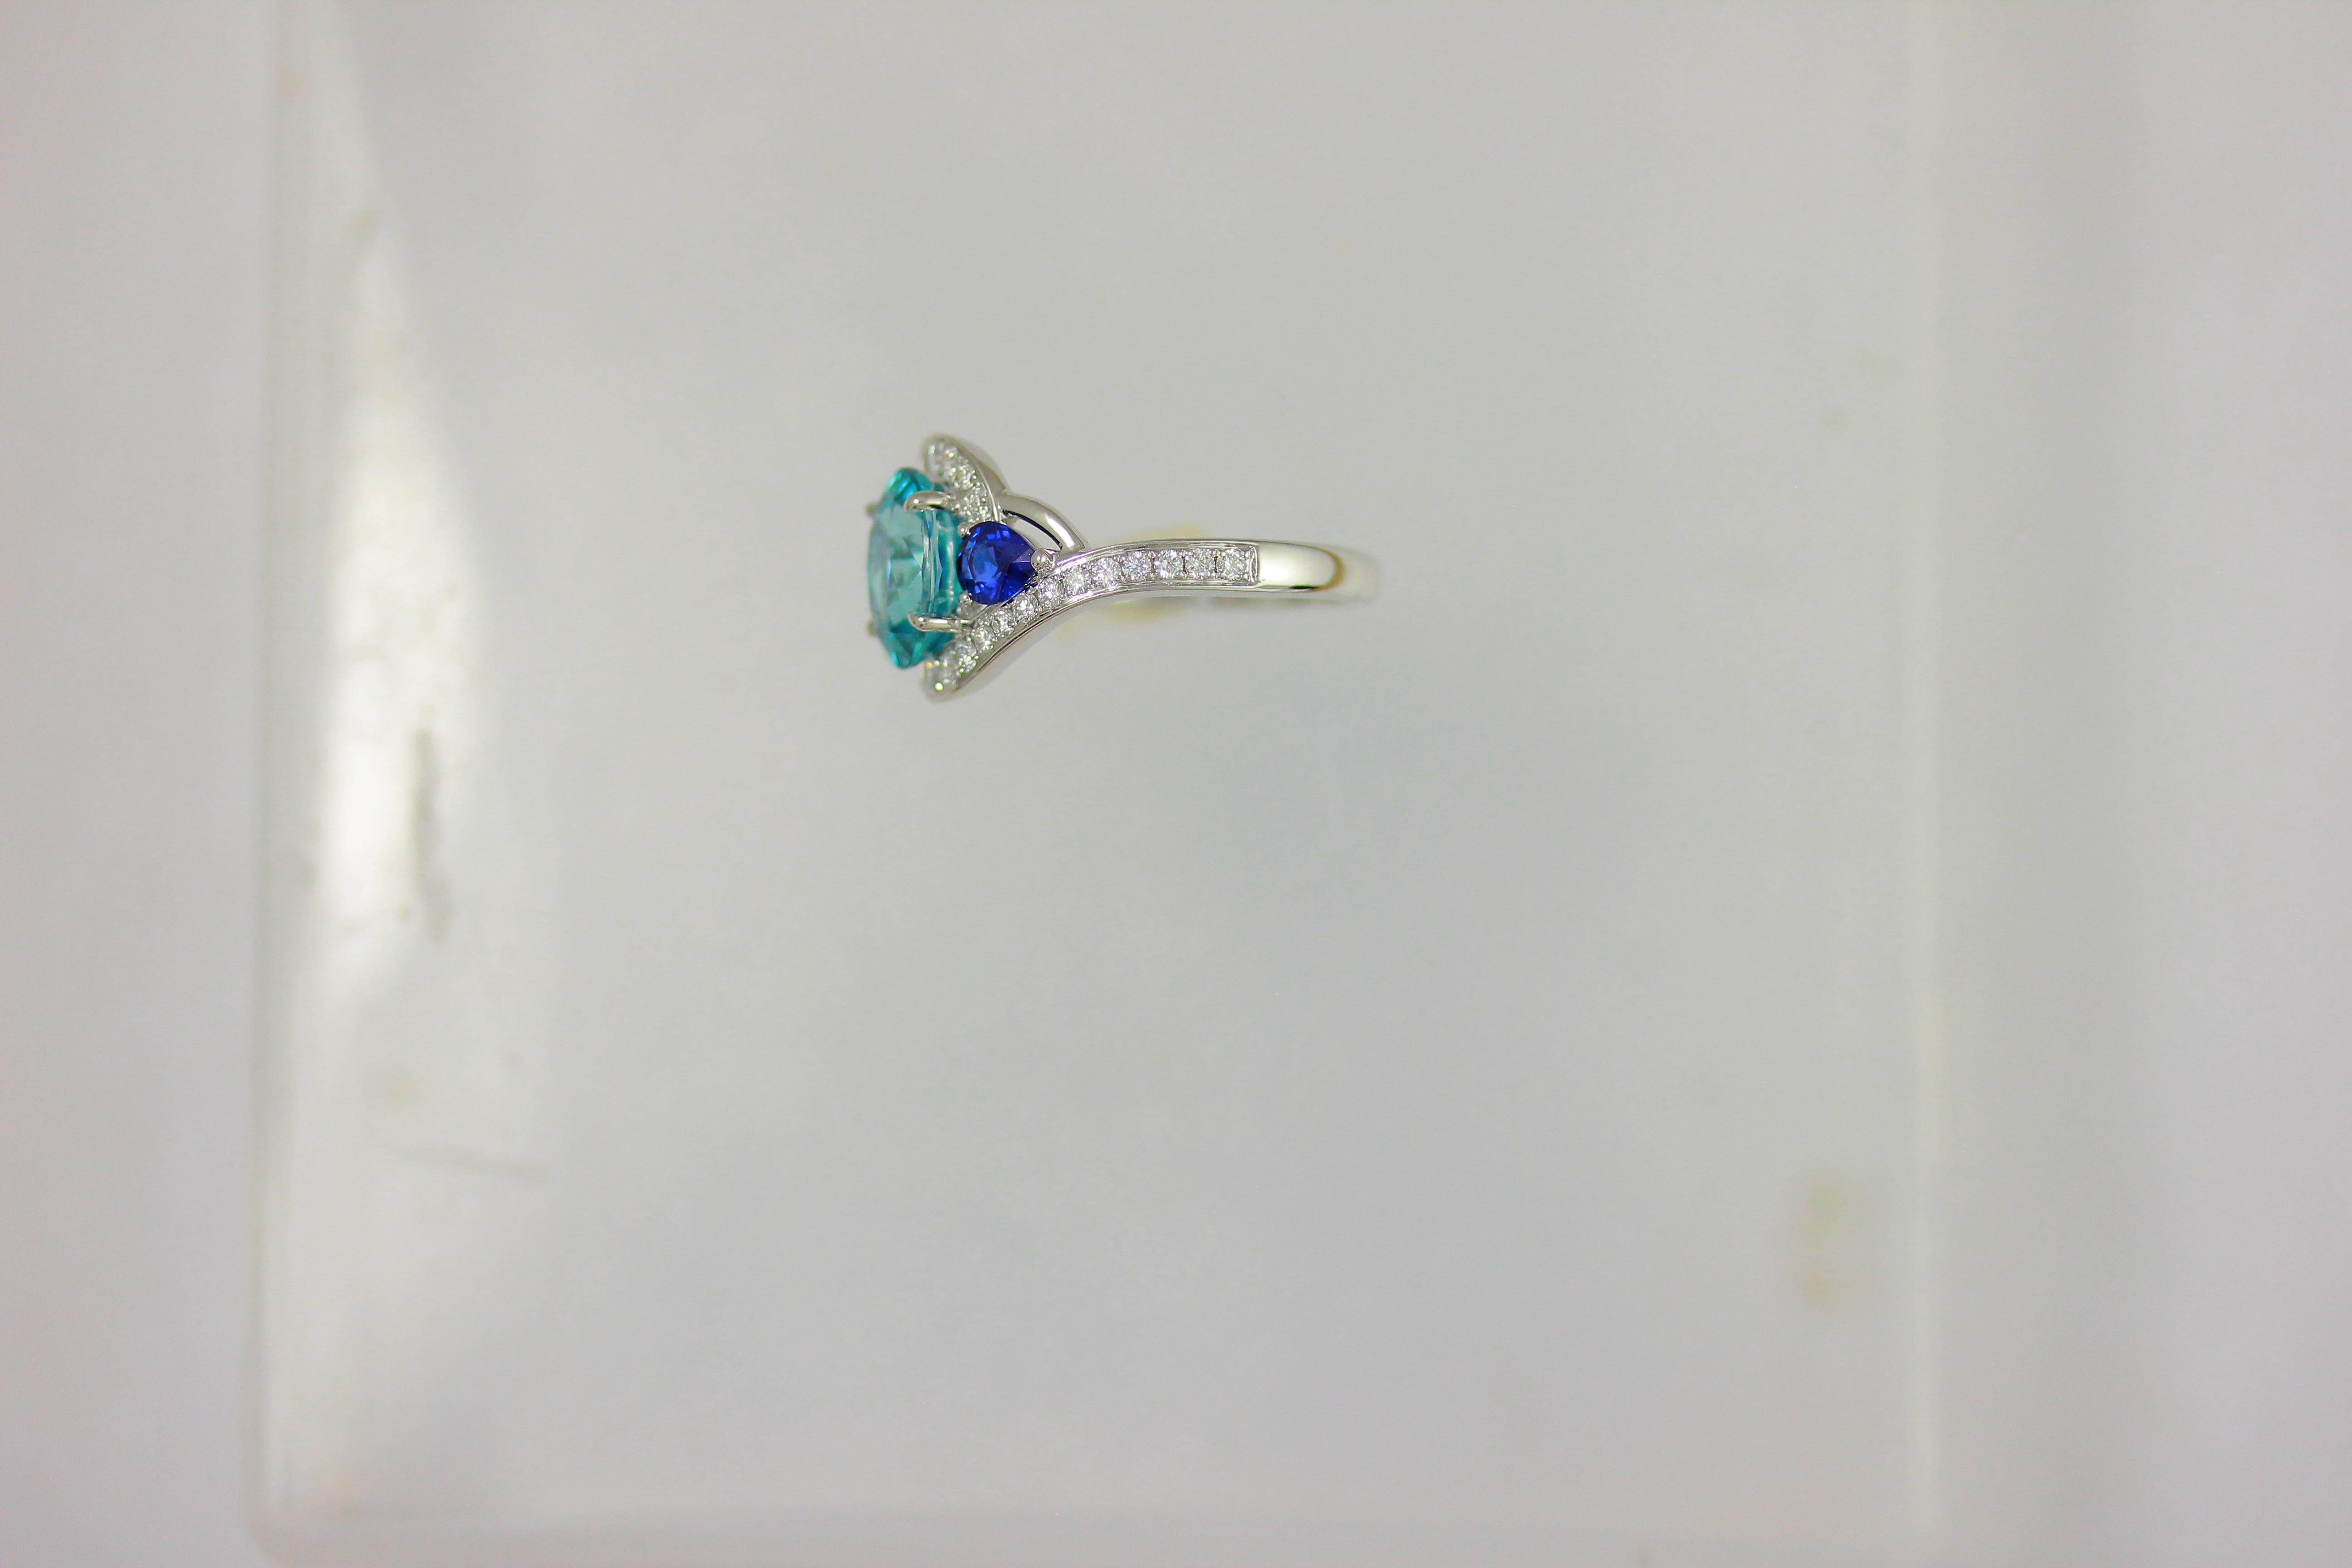 14K WG 3.96 CT BLUE ZIRCON CTR PS BLUE SAPPHIRE HALF FLOWING HALO PAVE DIAMOND OAK COCKTAIL AND FASHION RING, 2 BLSAP 0.74 CT, 34 DIA 0.42 Carats